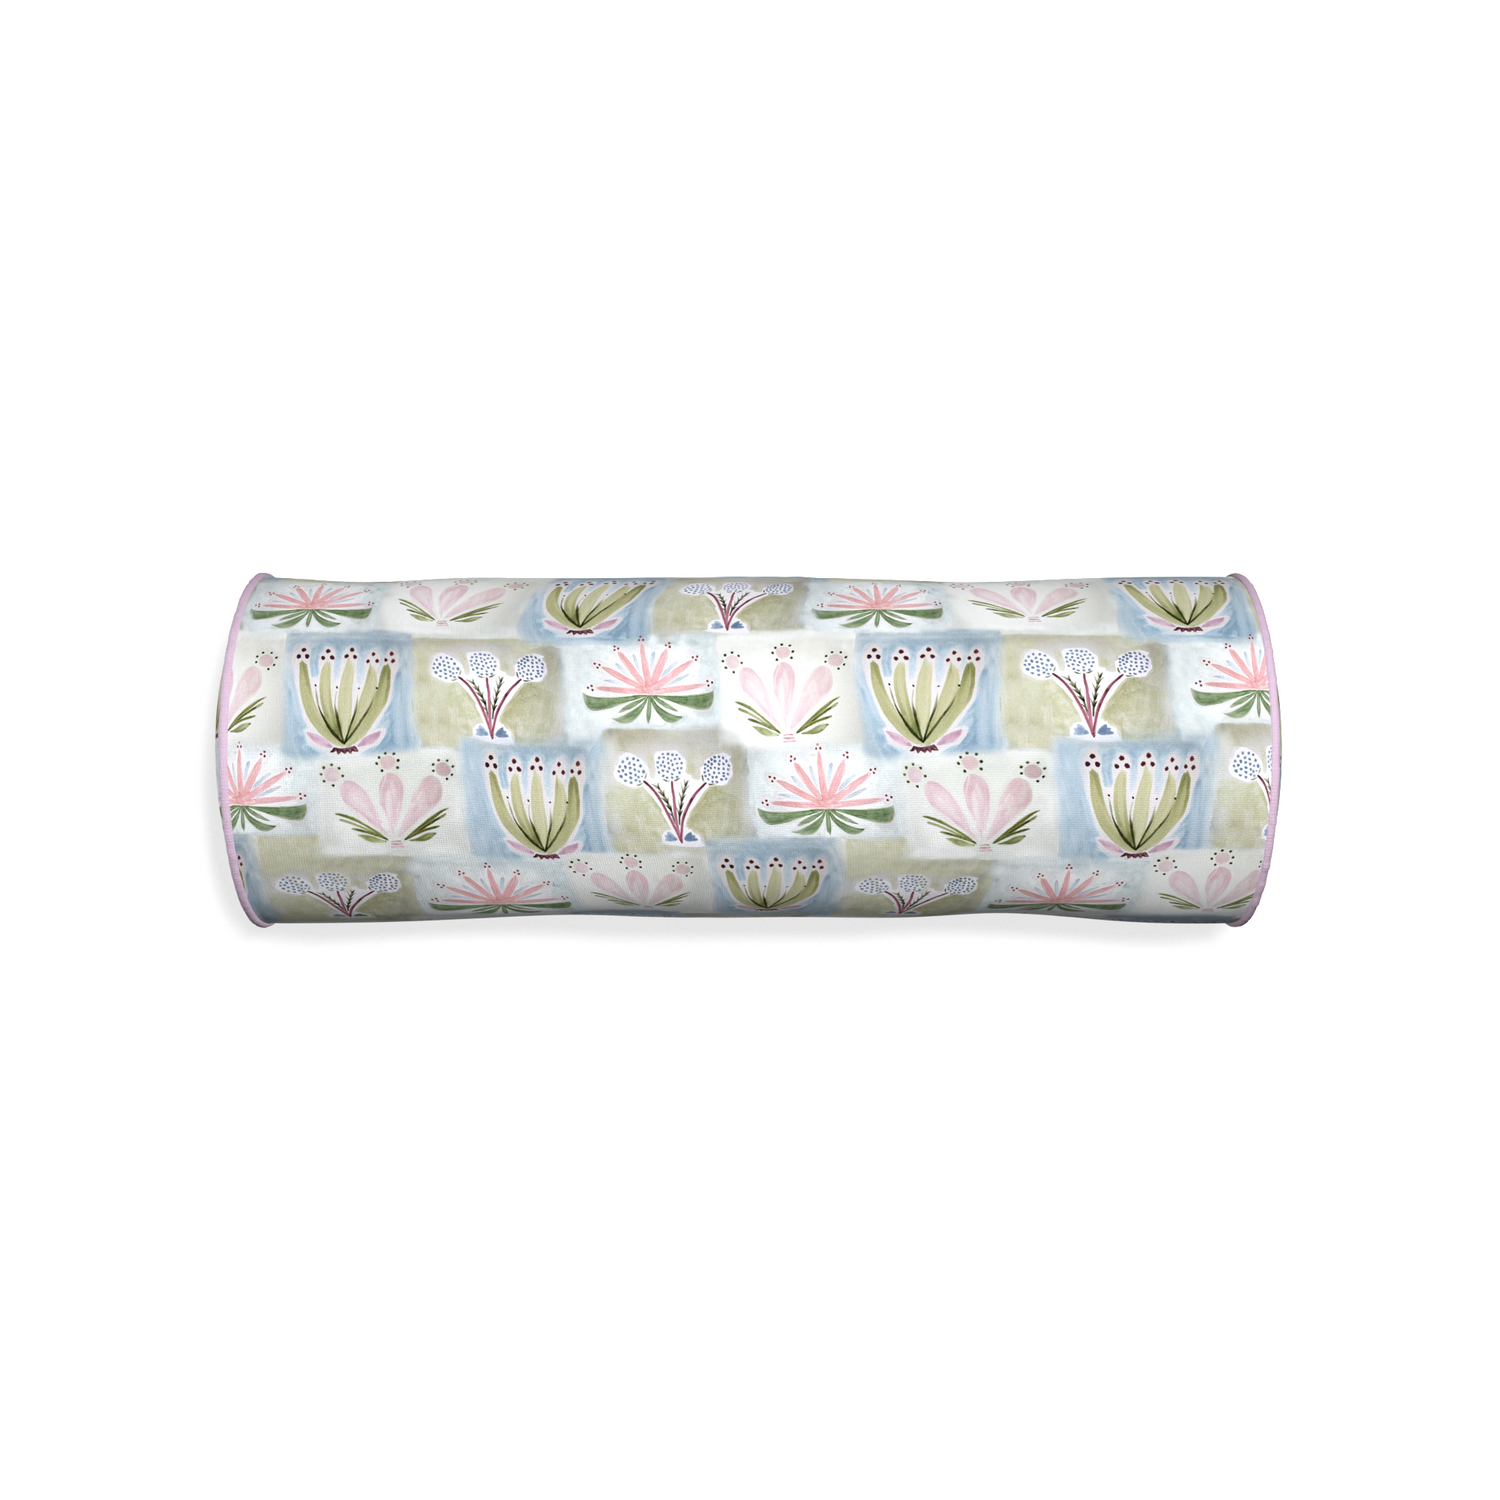 Bolster harper custom pillow with l piping on white background